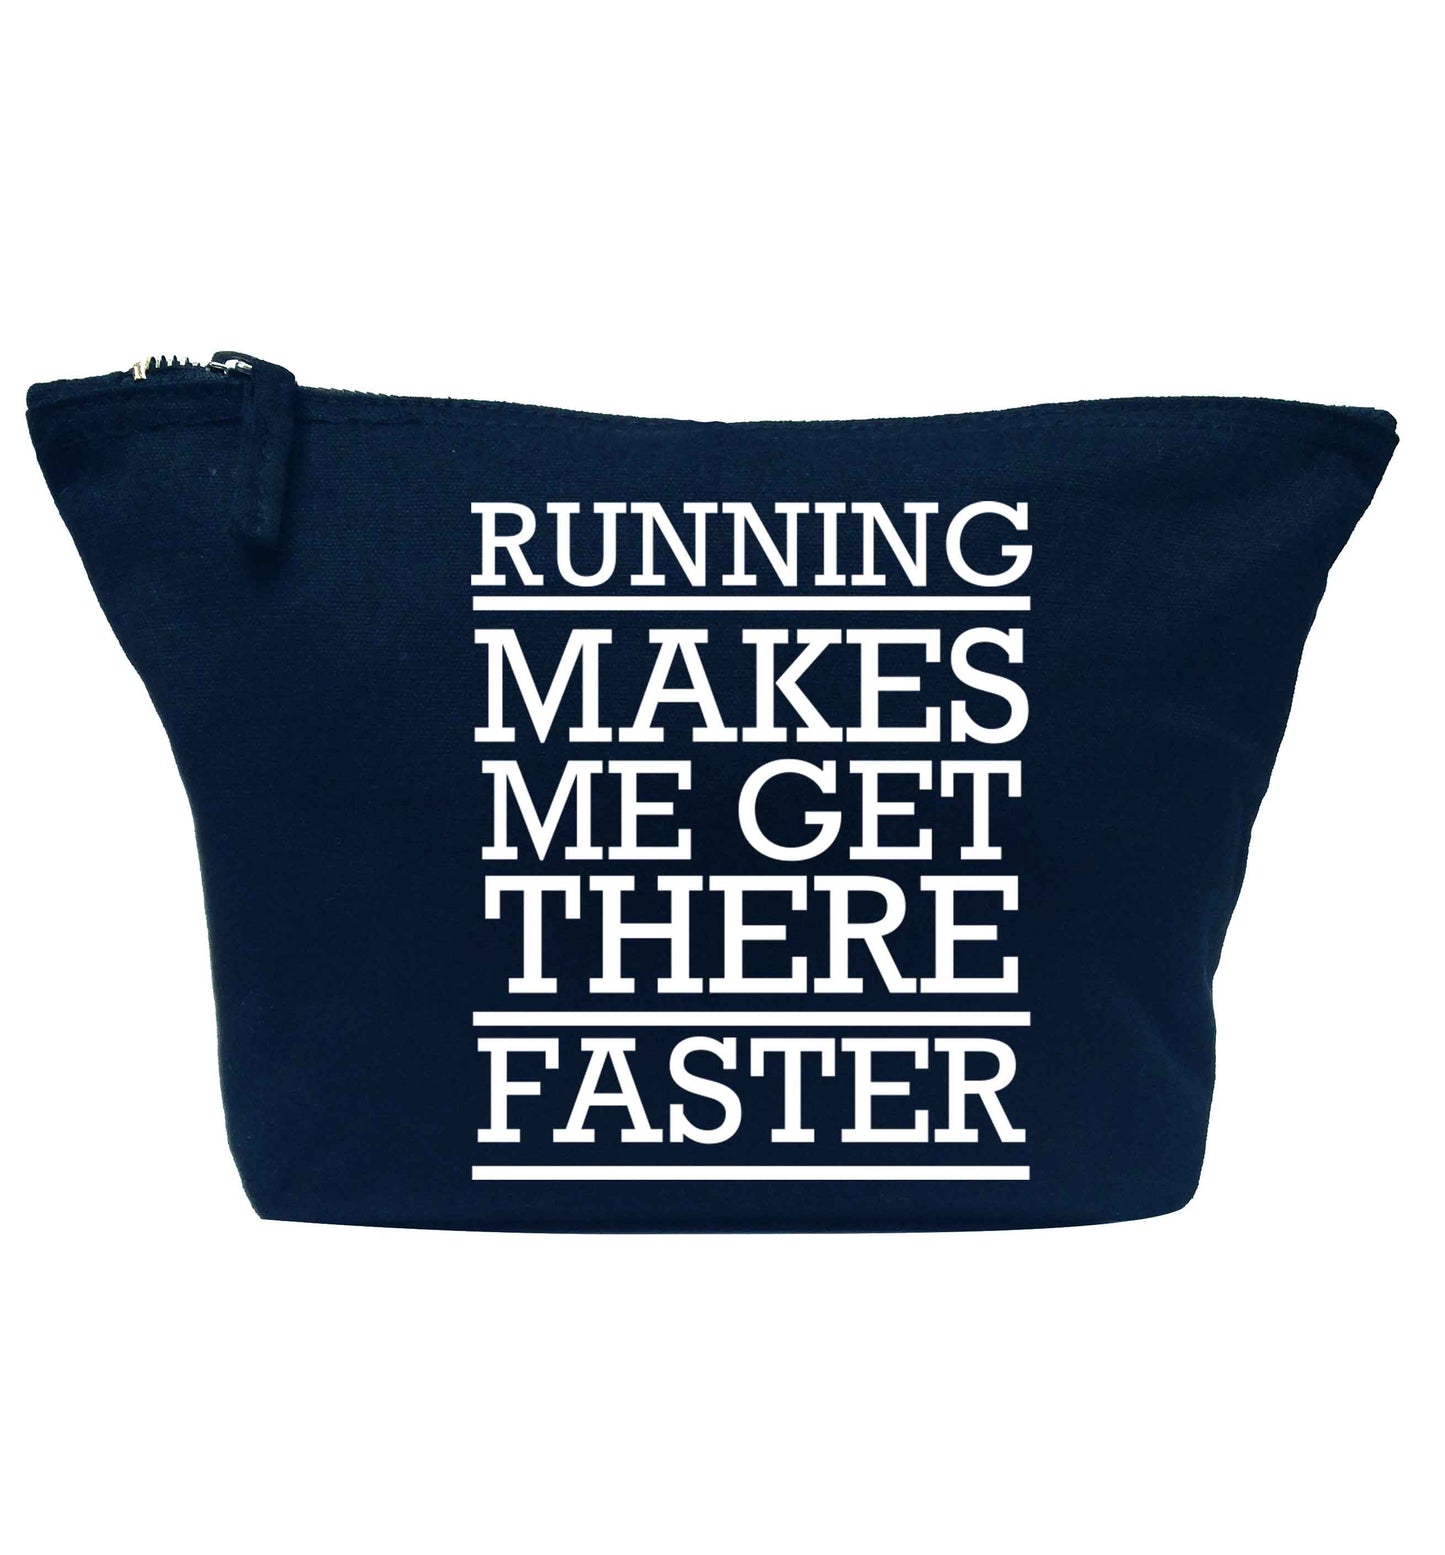 Running makes me get there faster navy makeup bag